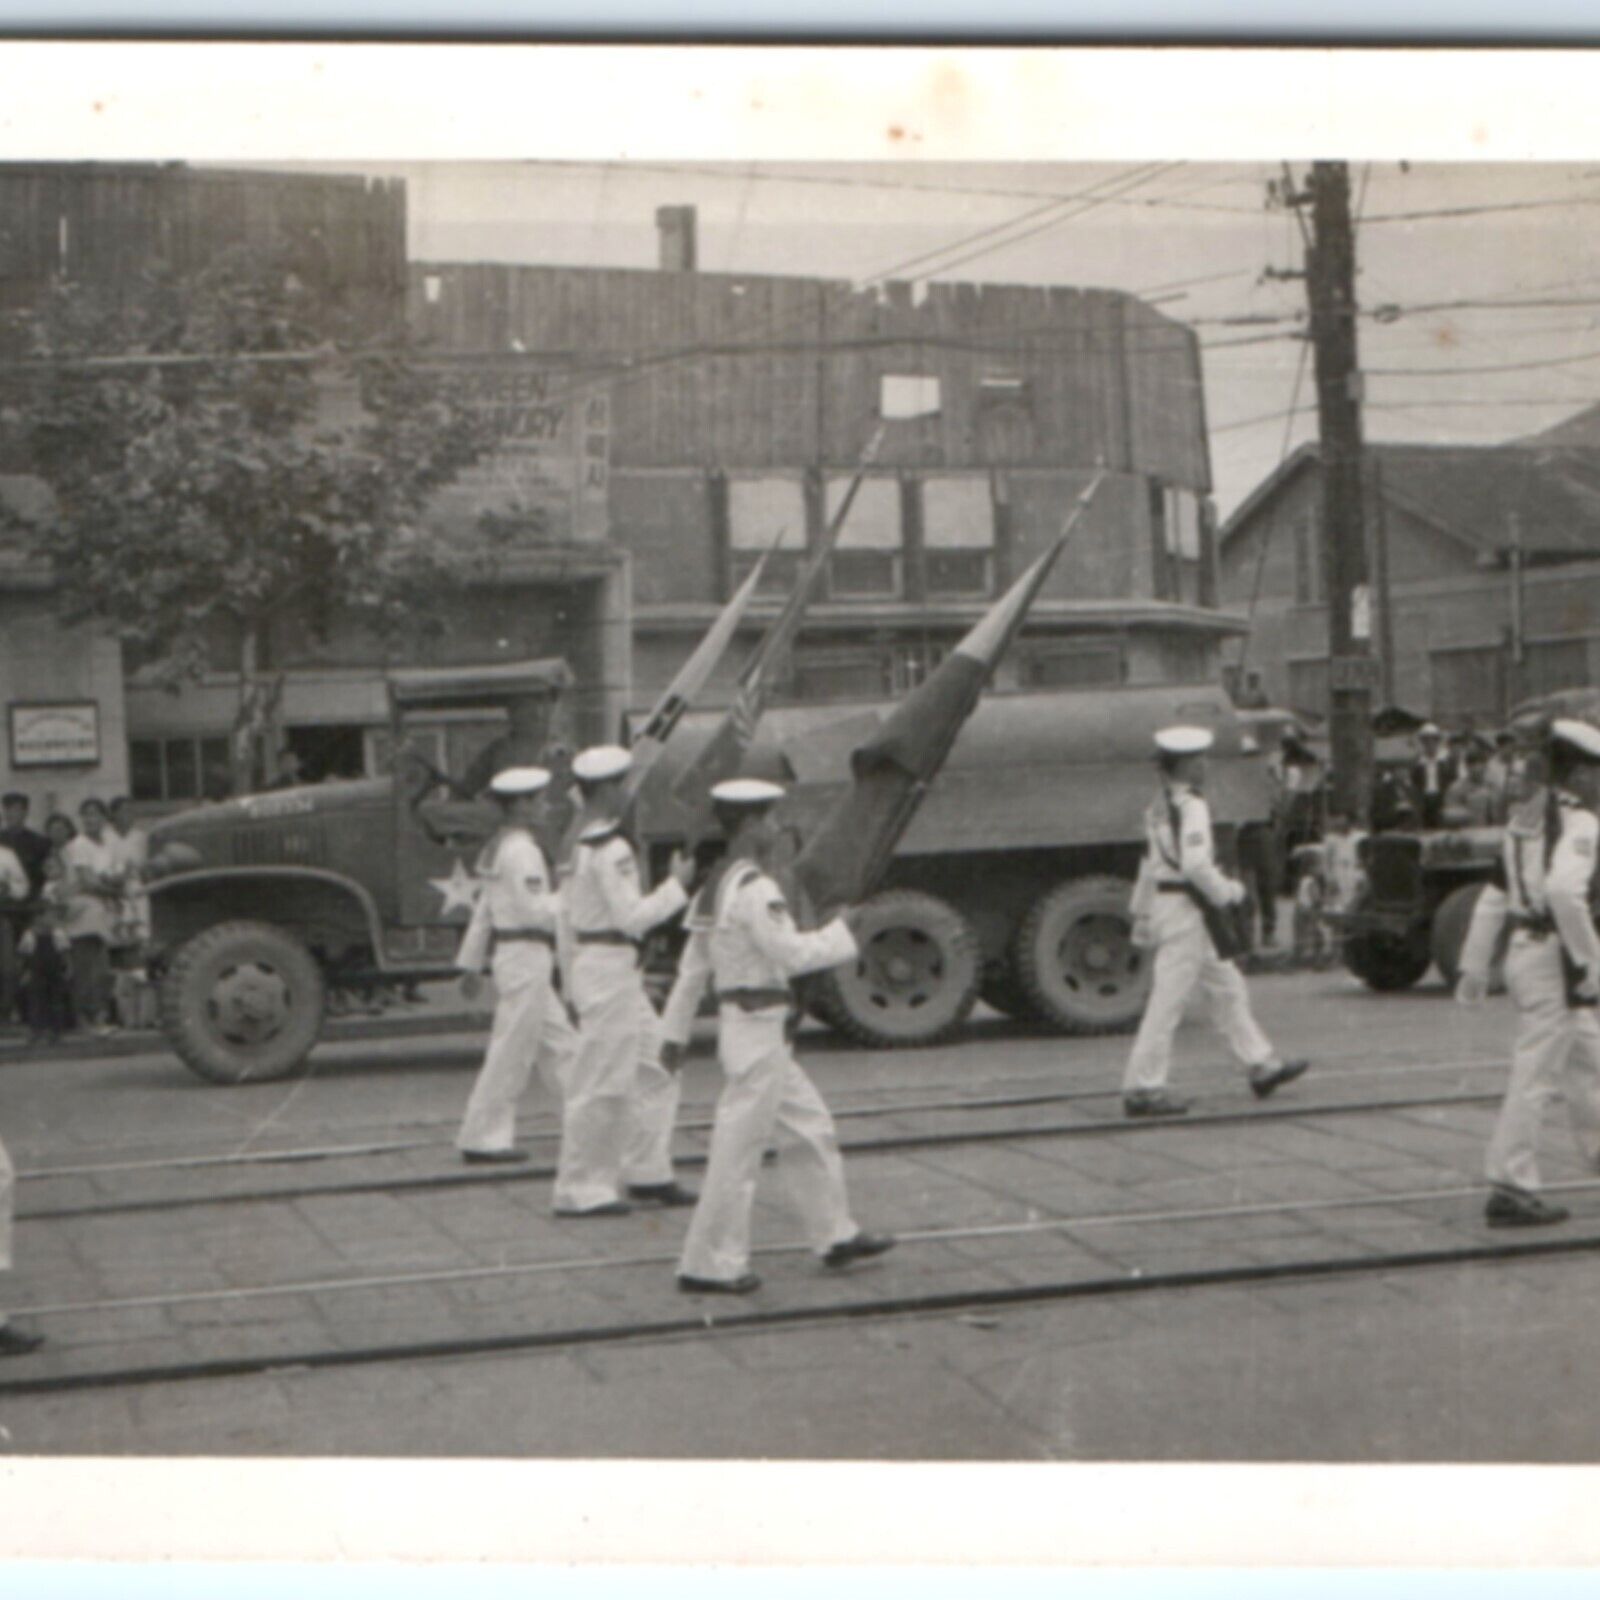 c1950s Korea / Japan Troops March Mini Real Photo Military Parade Downtown H30